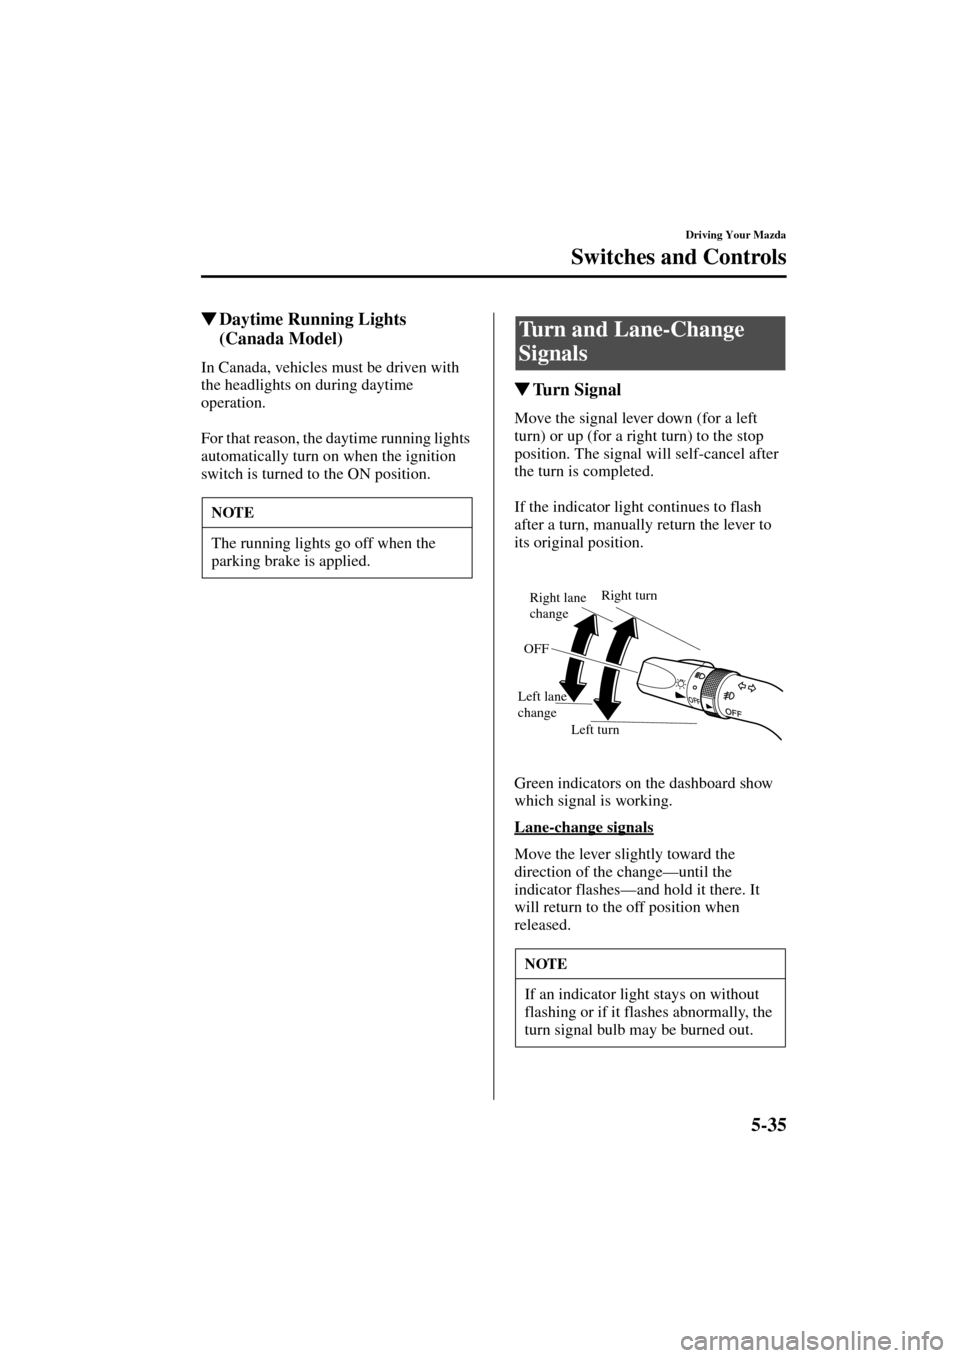 MAZDA MODEL MPV 2004  Owners Manual (in English) 5-35
Driving Your Mazda
Switches and Controls
Form No. 8S06-EA-03H
Daytime Running Lights 
(Canada Model)
In Canada, vehicles must be driven with 
the headlights on during daytime 
operation.
For tha